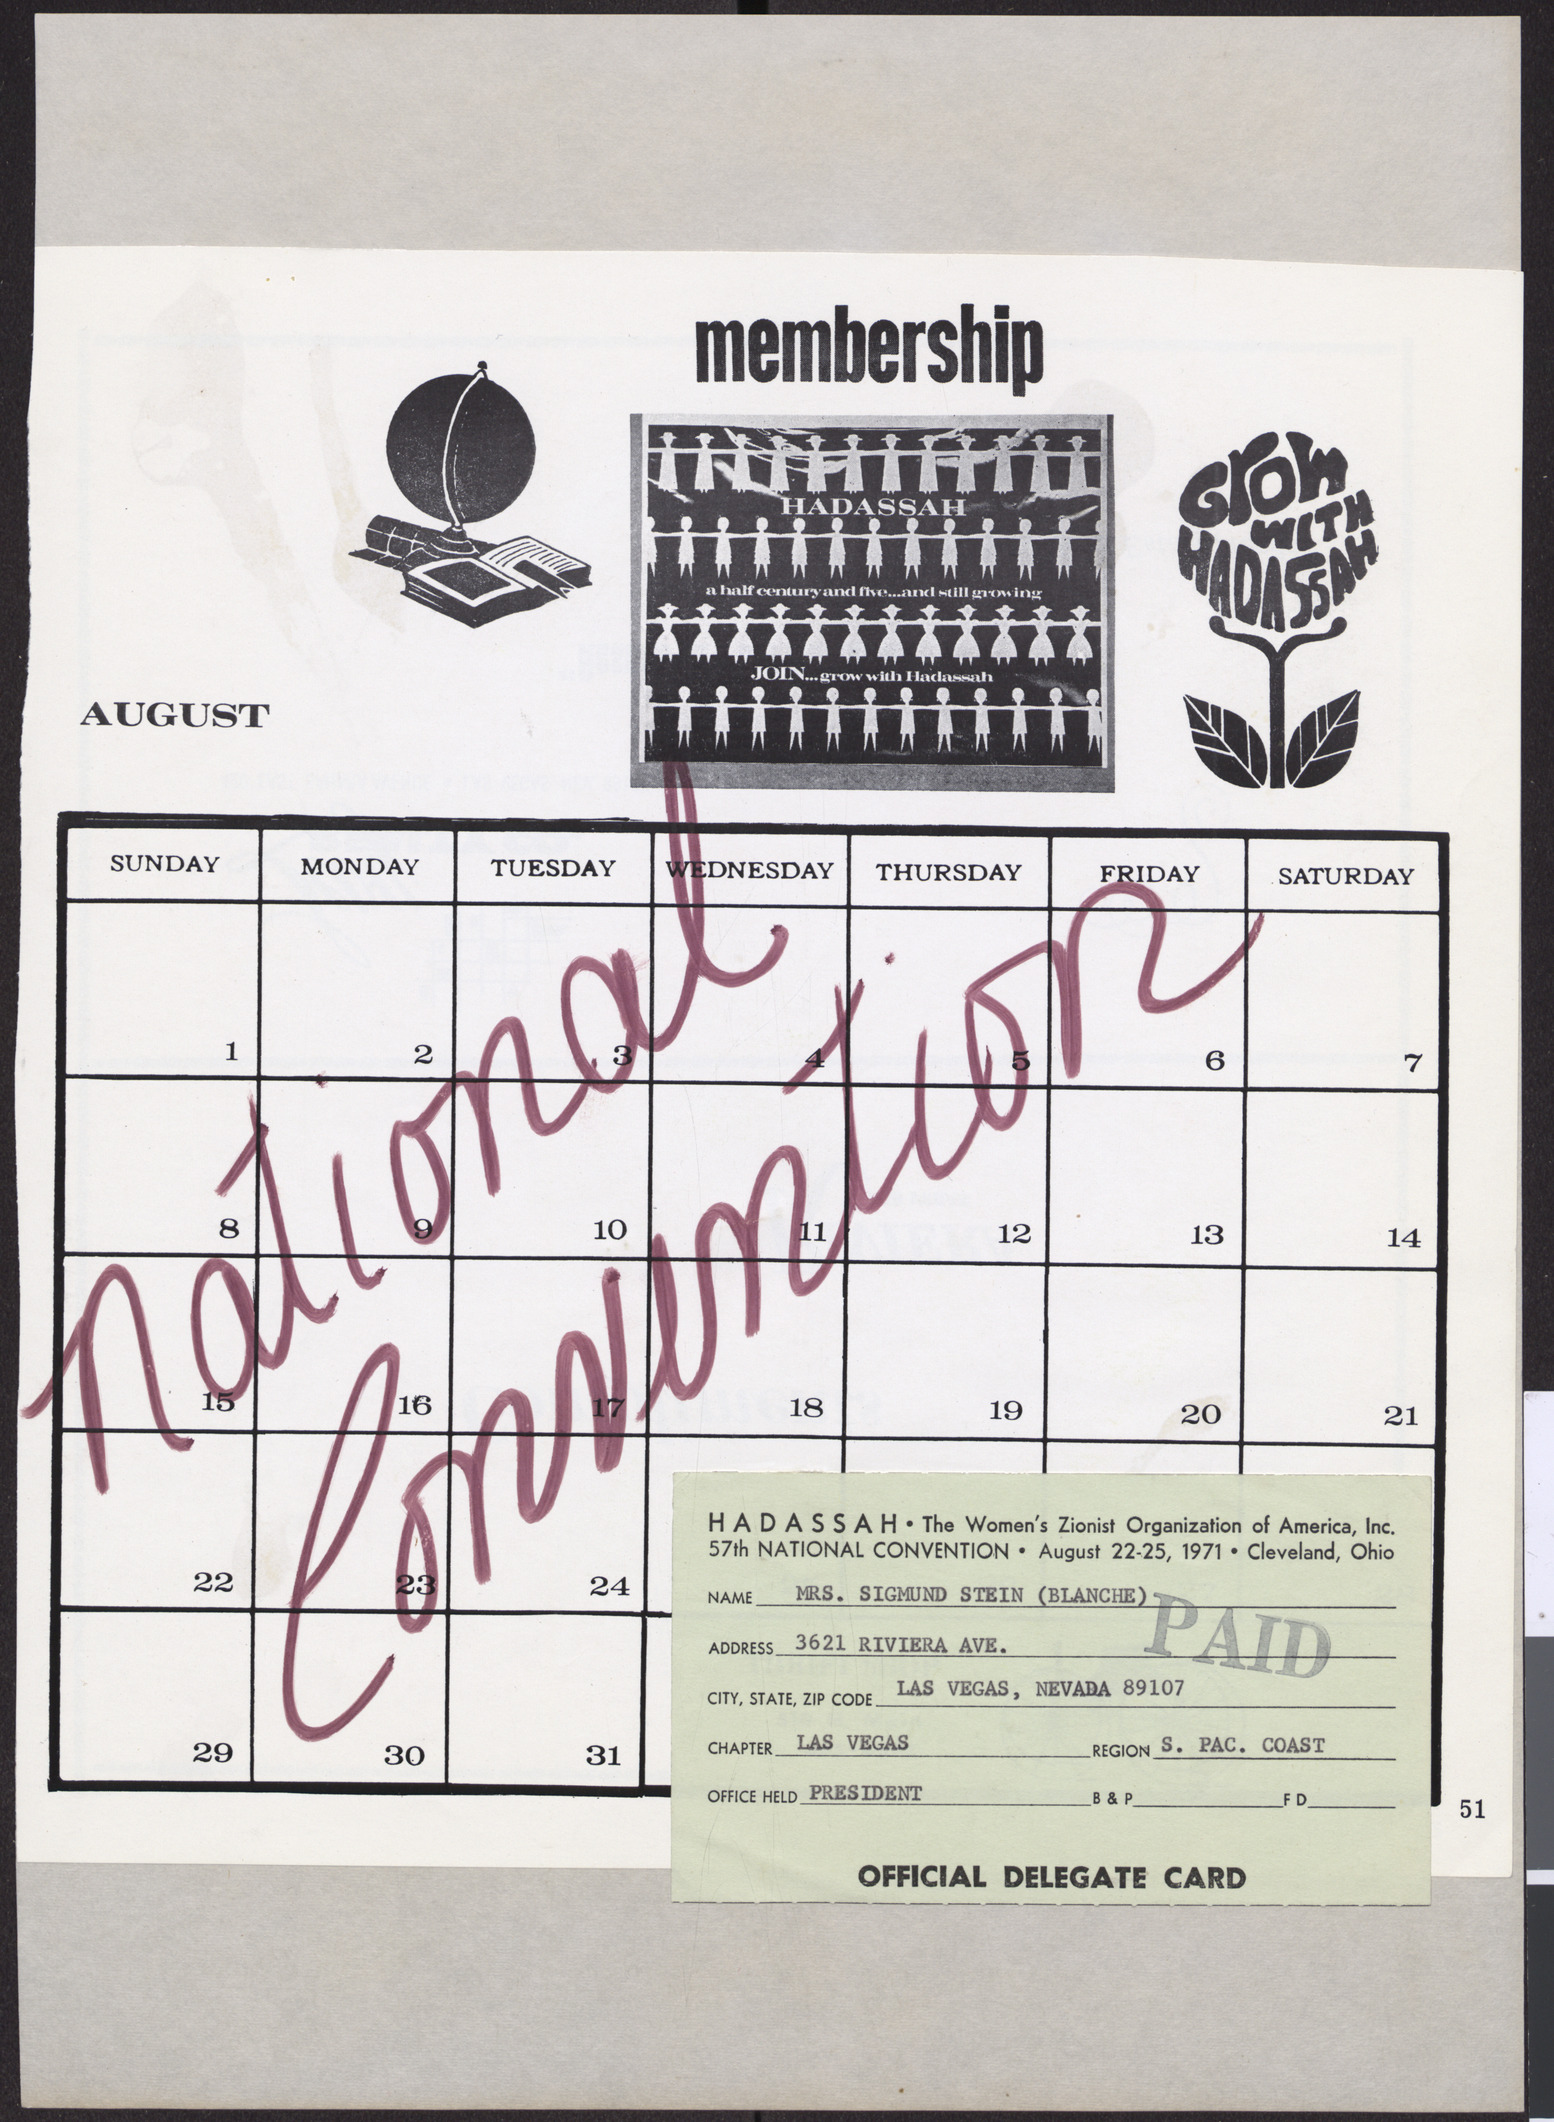 Calendar page, August 1971, and delegate card for Blanche Stein at 57th National Convention of Hadassah